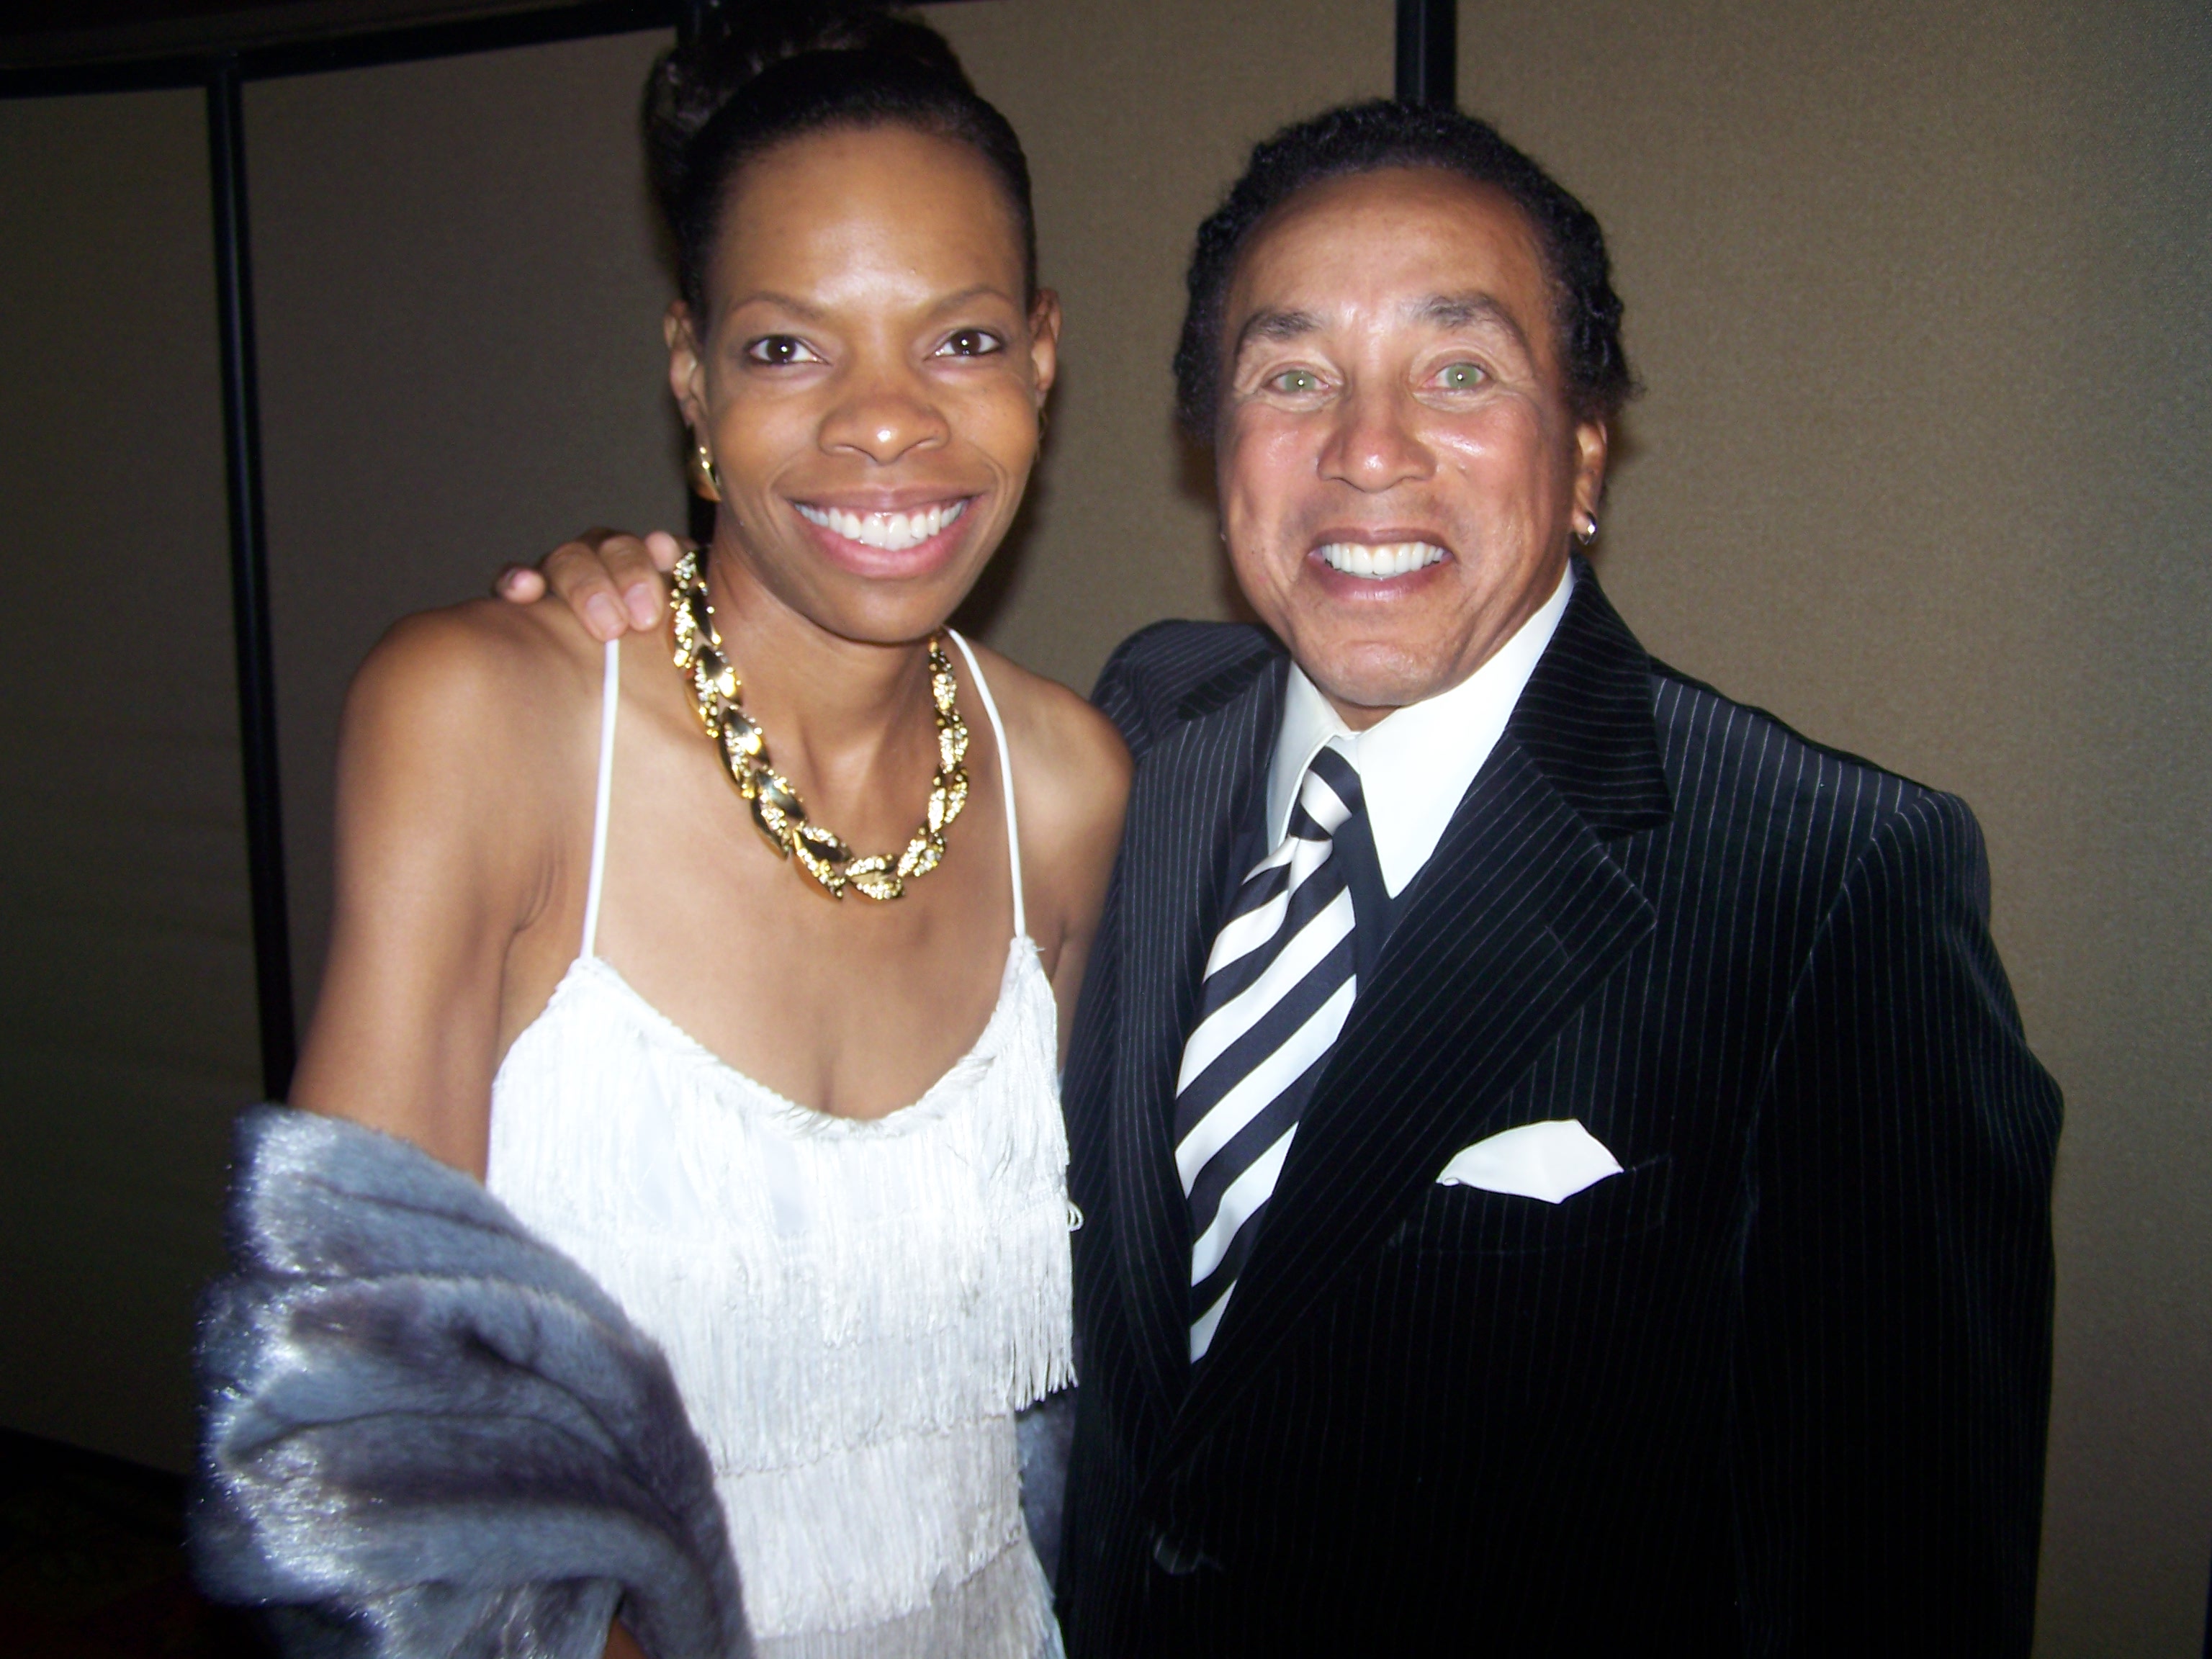 Cat'Ania McCoy-Howze photographs with Smokey Robinson after she interviews him at the Temecula Film Festival